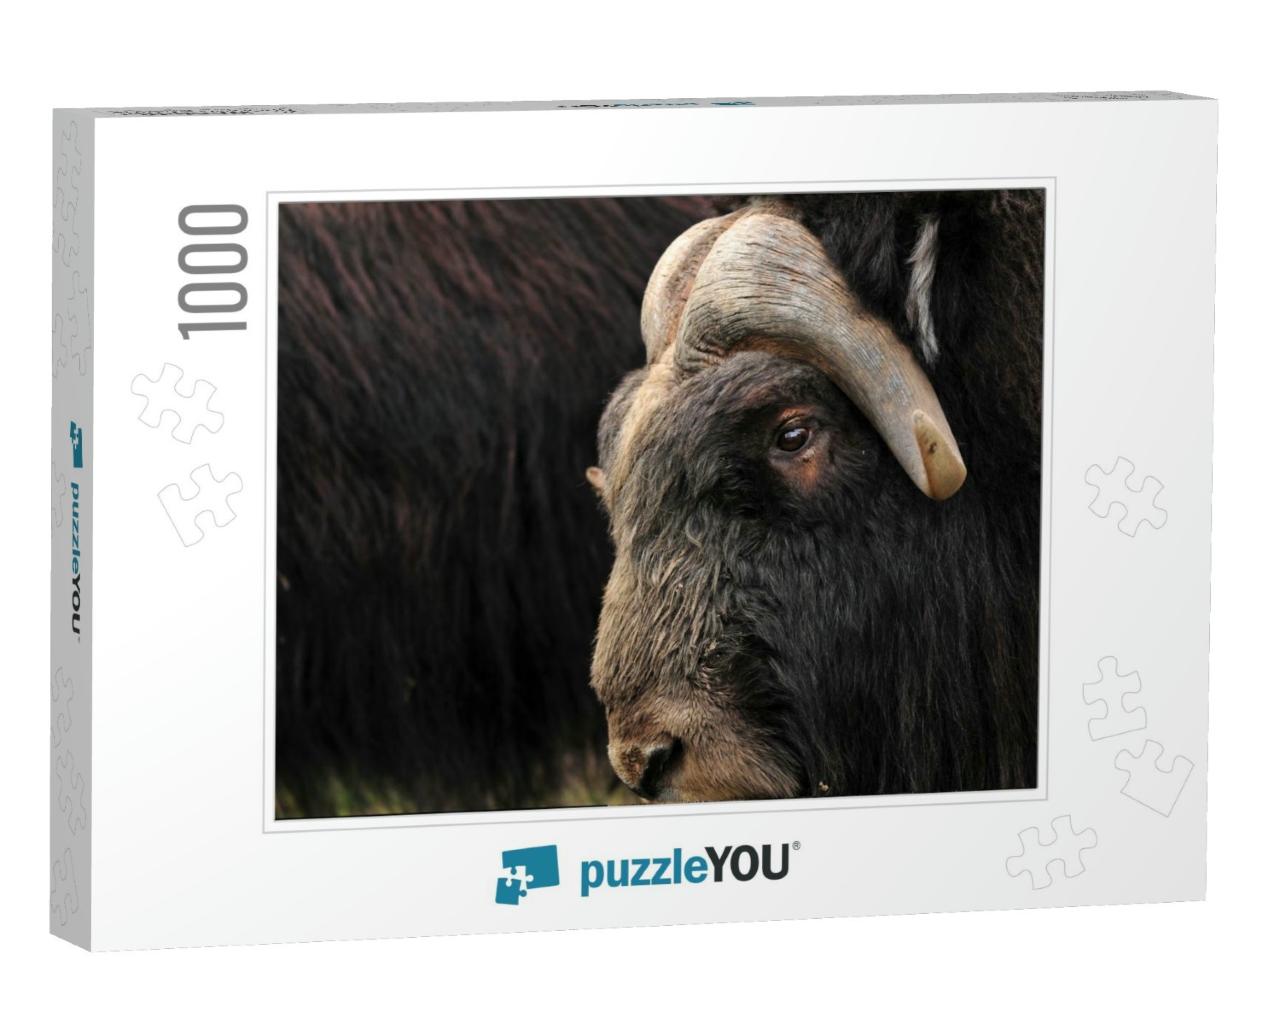 Closeup of a Musk Ox with Others from the Herd in the Bac... Jigsaw Puzzle with 1000 pieces